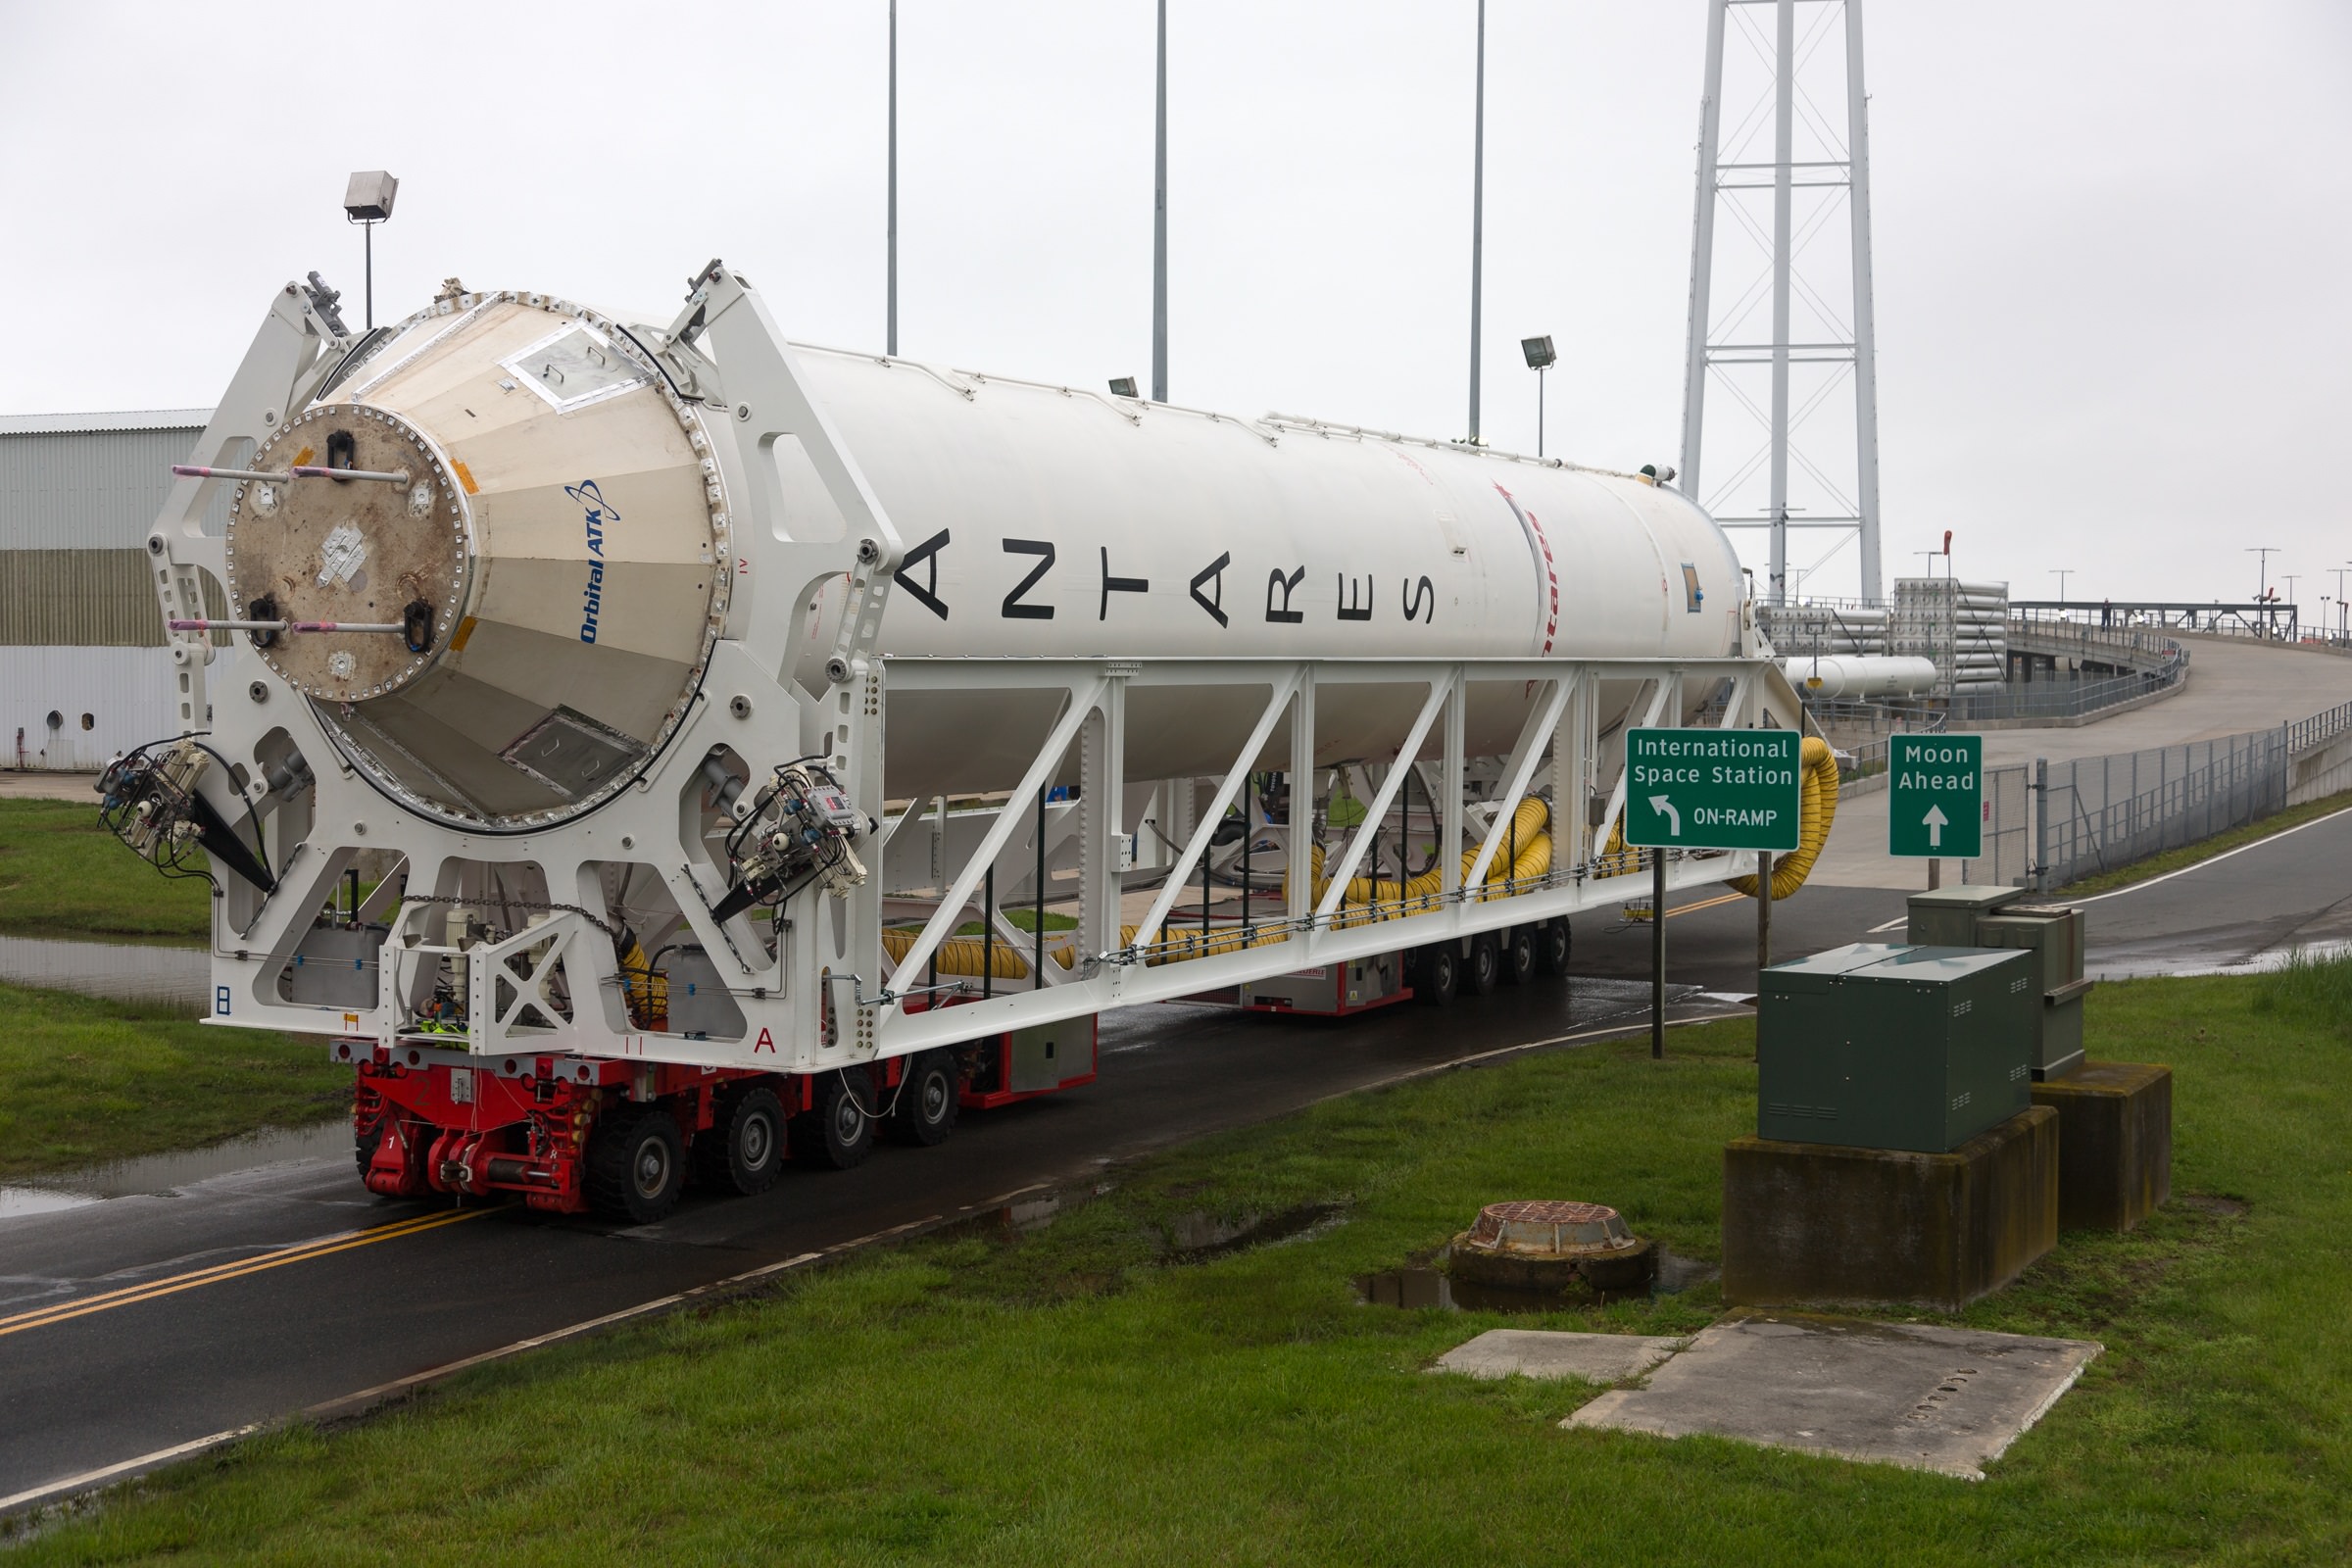 Orbital ATK’s Antares first stage with the new engines is rolled from NASA Wallops Flight Facility’s Horizontal Integration Facility to Virginia Space’s Mid-Atlantic Regional Spaceport Pad-0A on May 12, 2016, in preparation for the upcoming stage test in the next few weeks.   Credit: NASA's Wallops Flight Facility/Allison Stancil